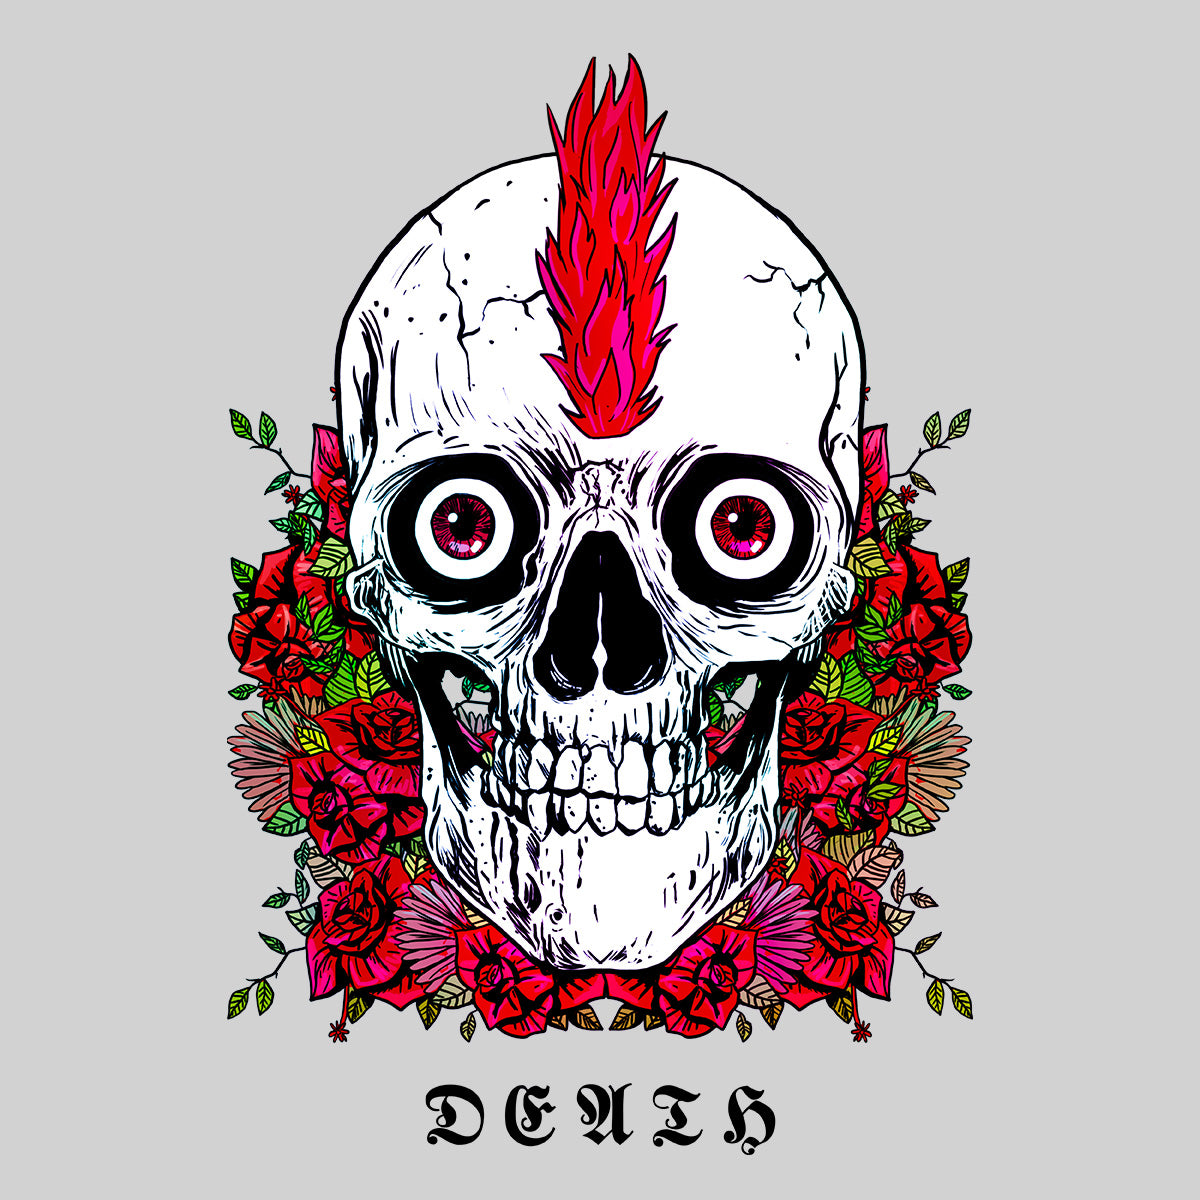 Punk Skull With Roses and Red Hair T-shirts with an Attitude For Men Crew Neck - Kuzi Tees